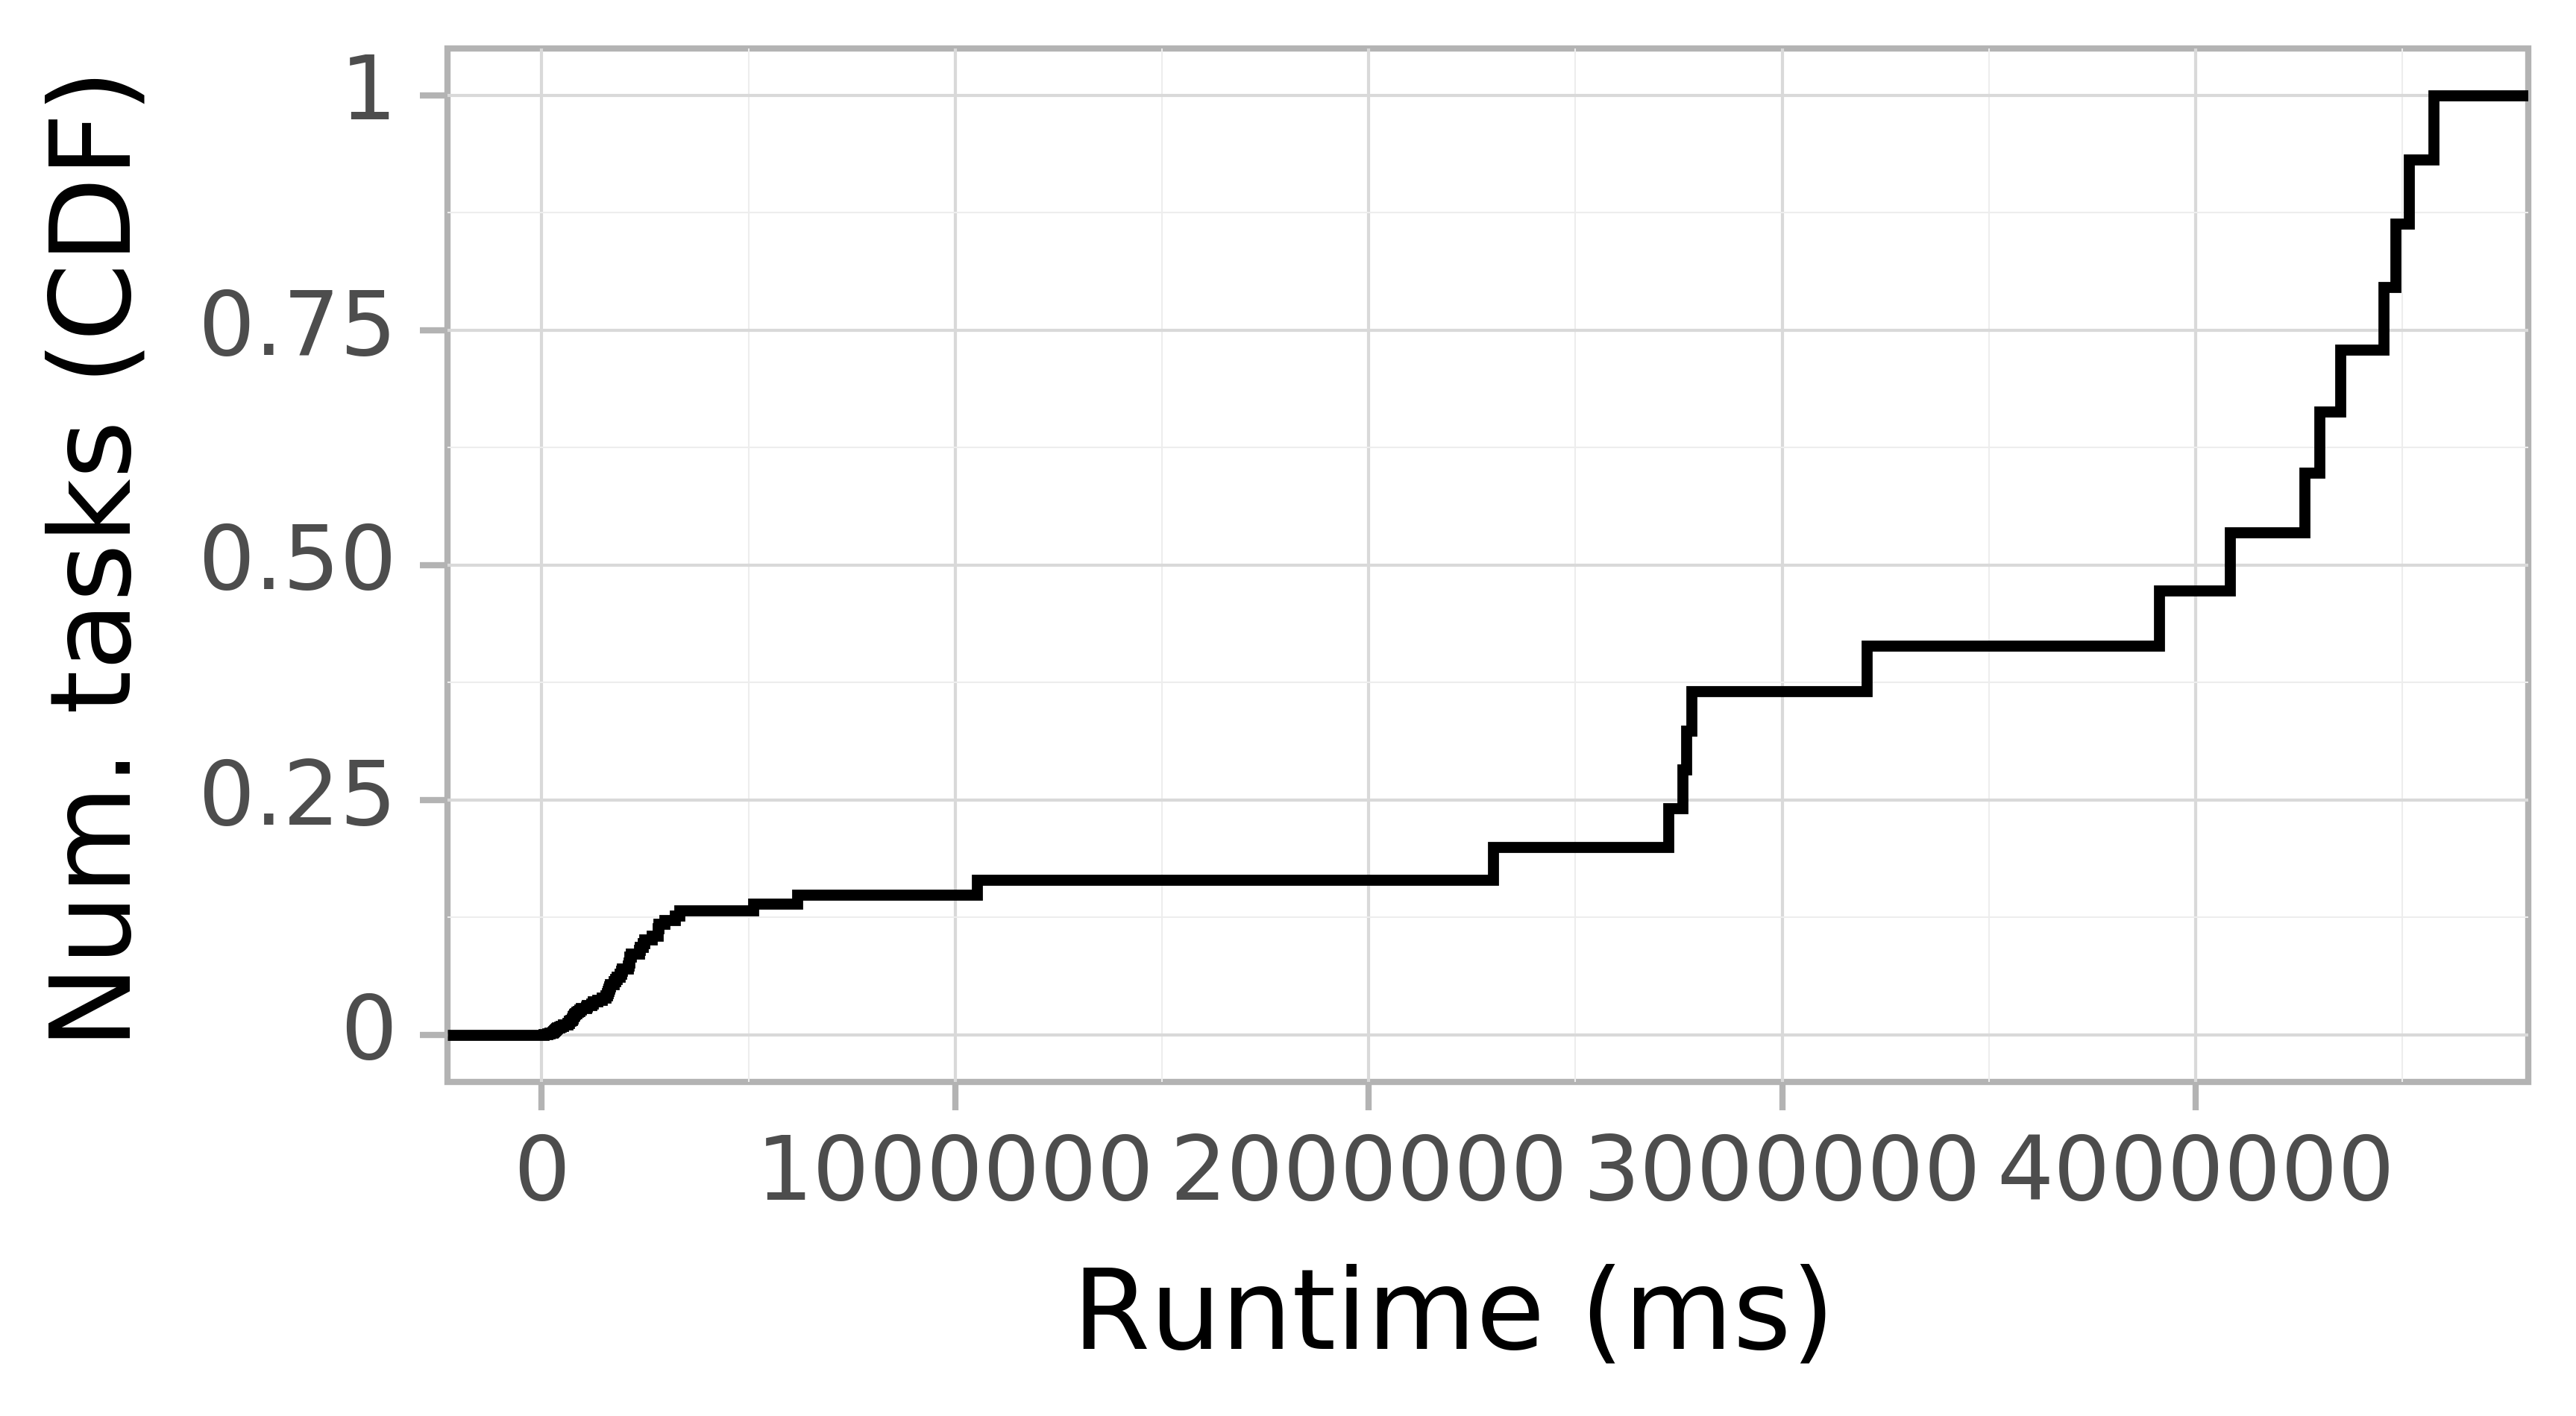 Task runtime CDF graph for the Pegasus_P5 trace.